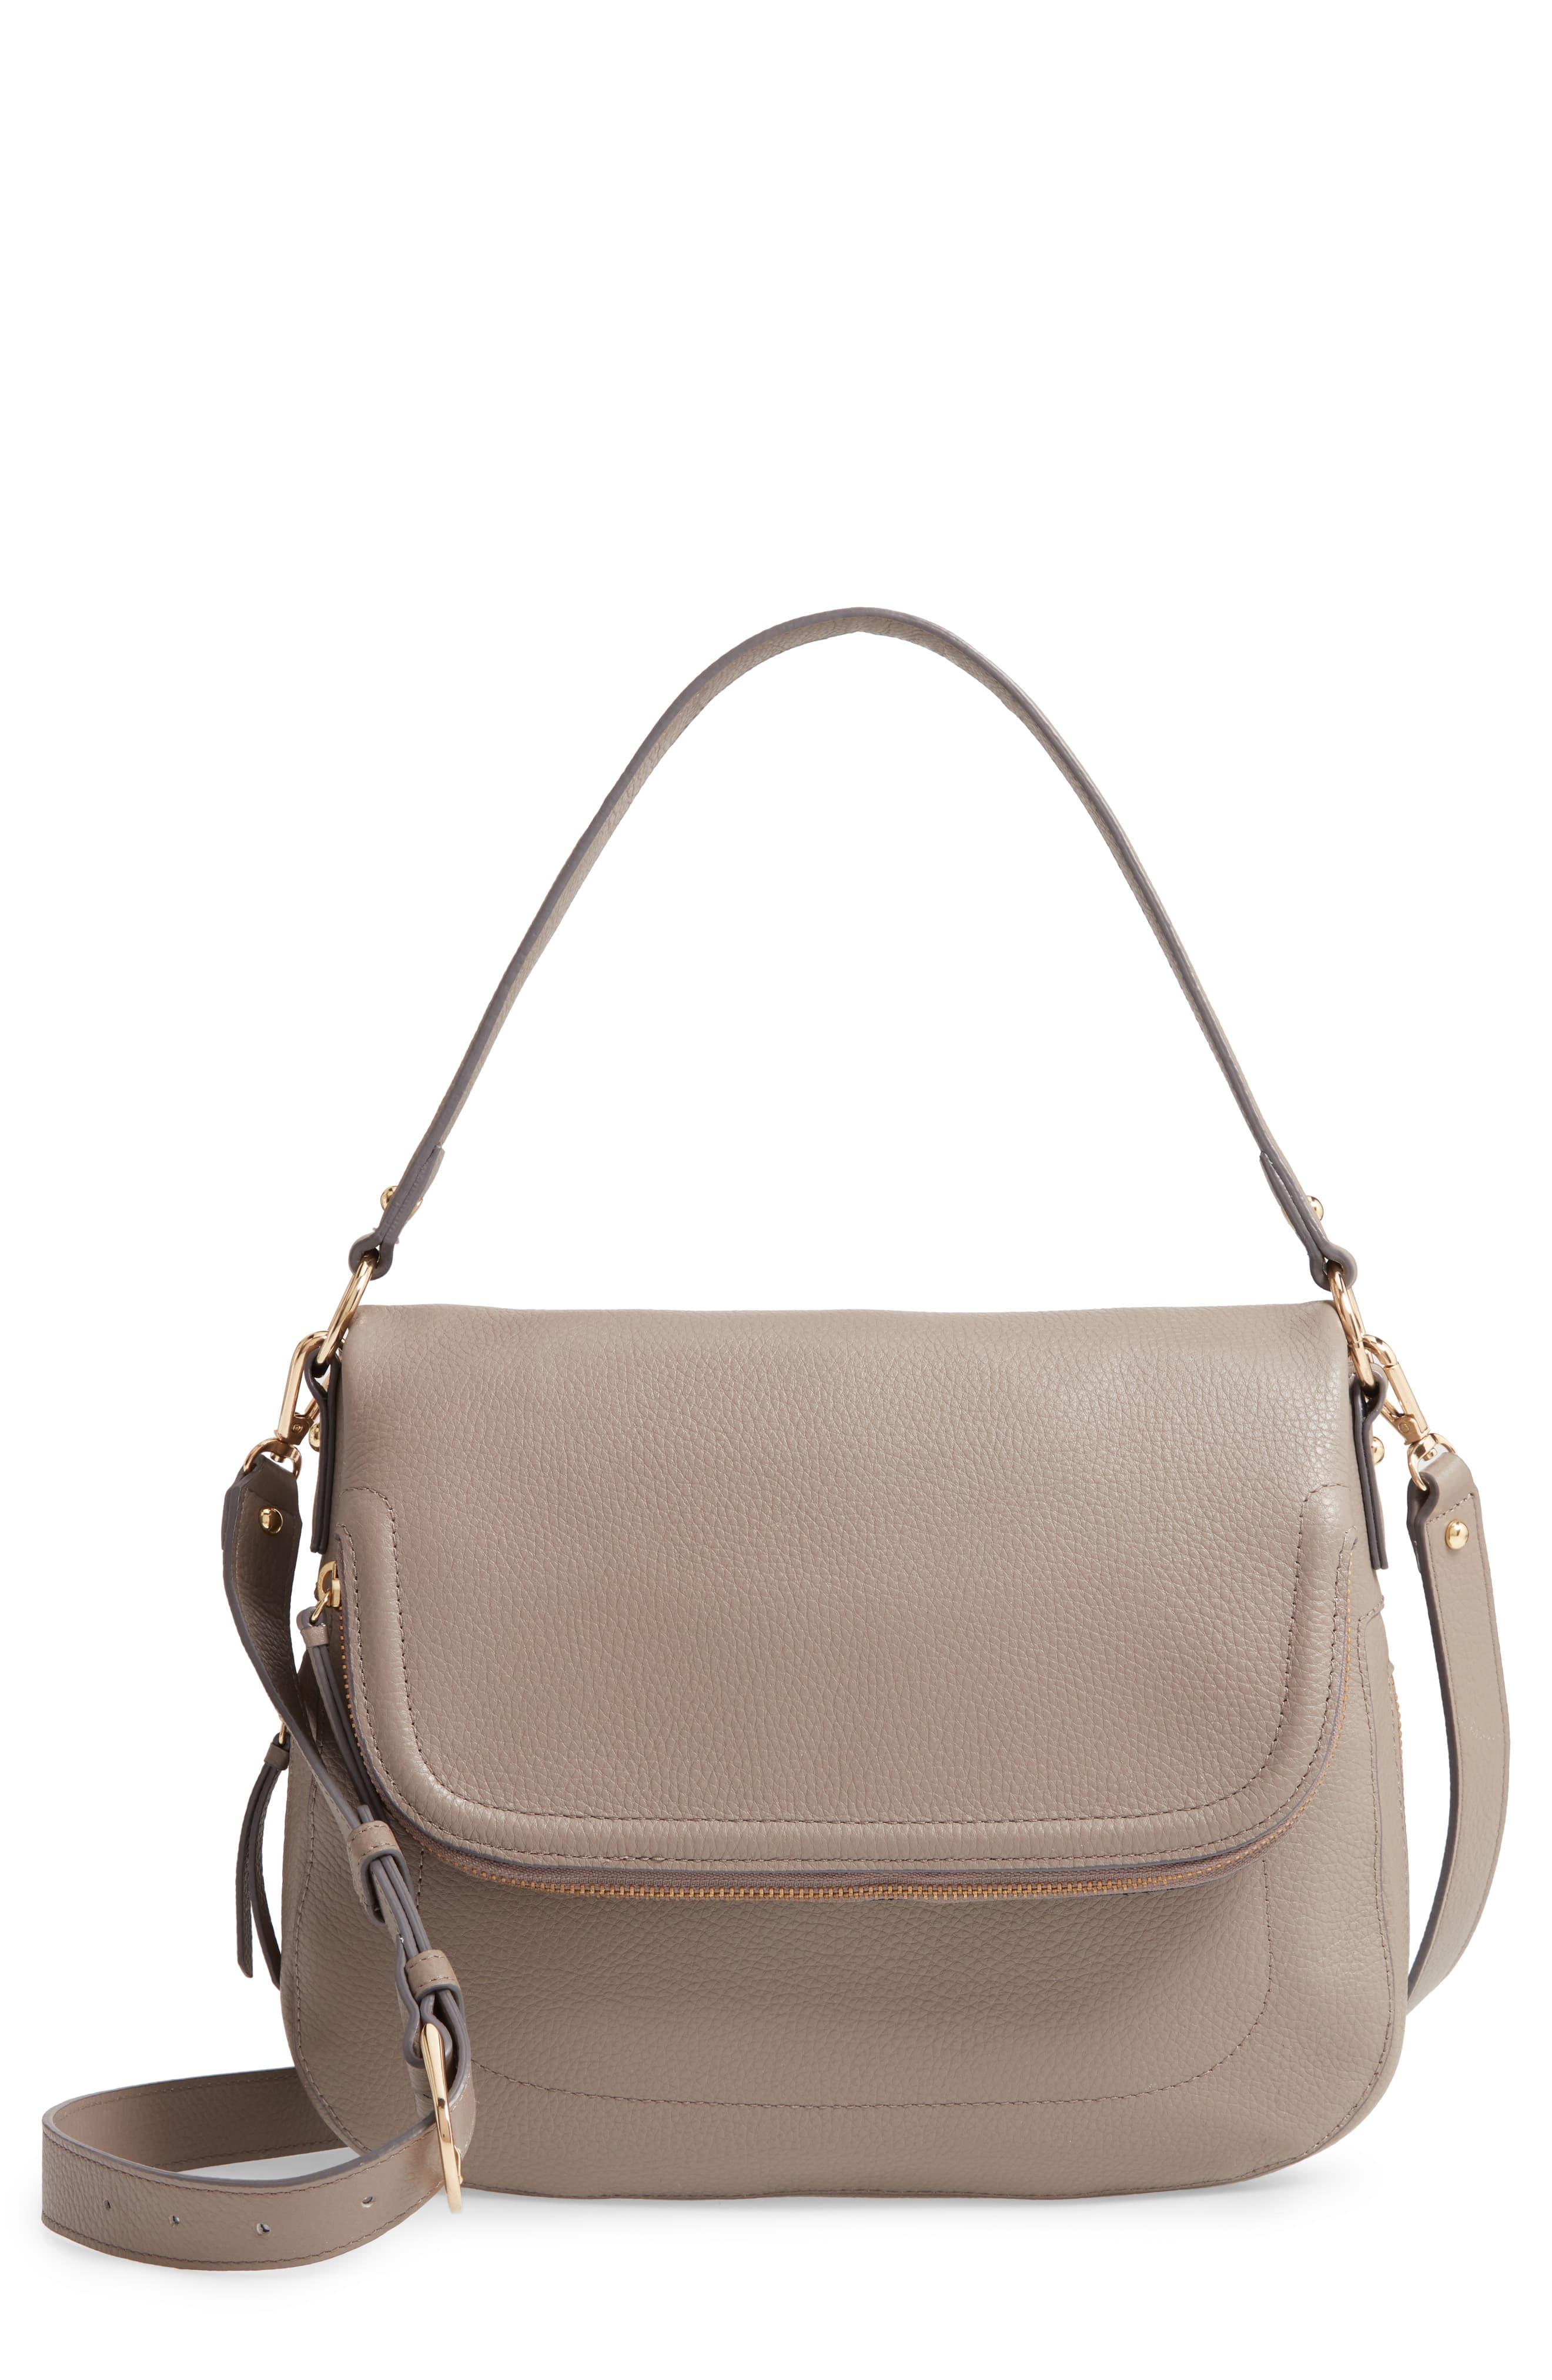 Nordstrom Bella Leather Crossbody Bag in Grey Taupe (Gray) - Lyst